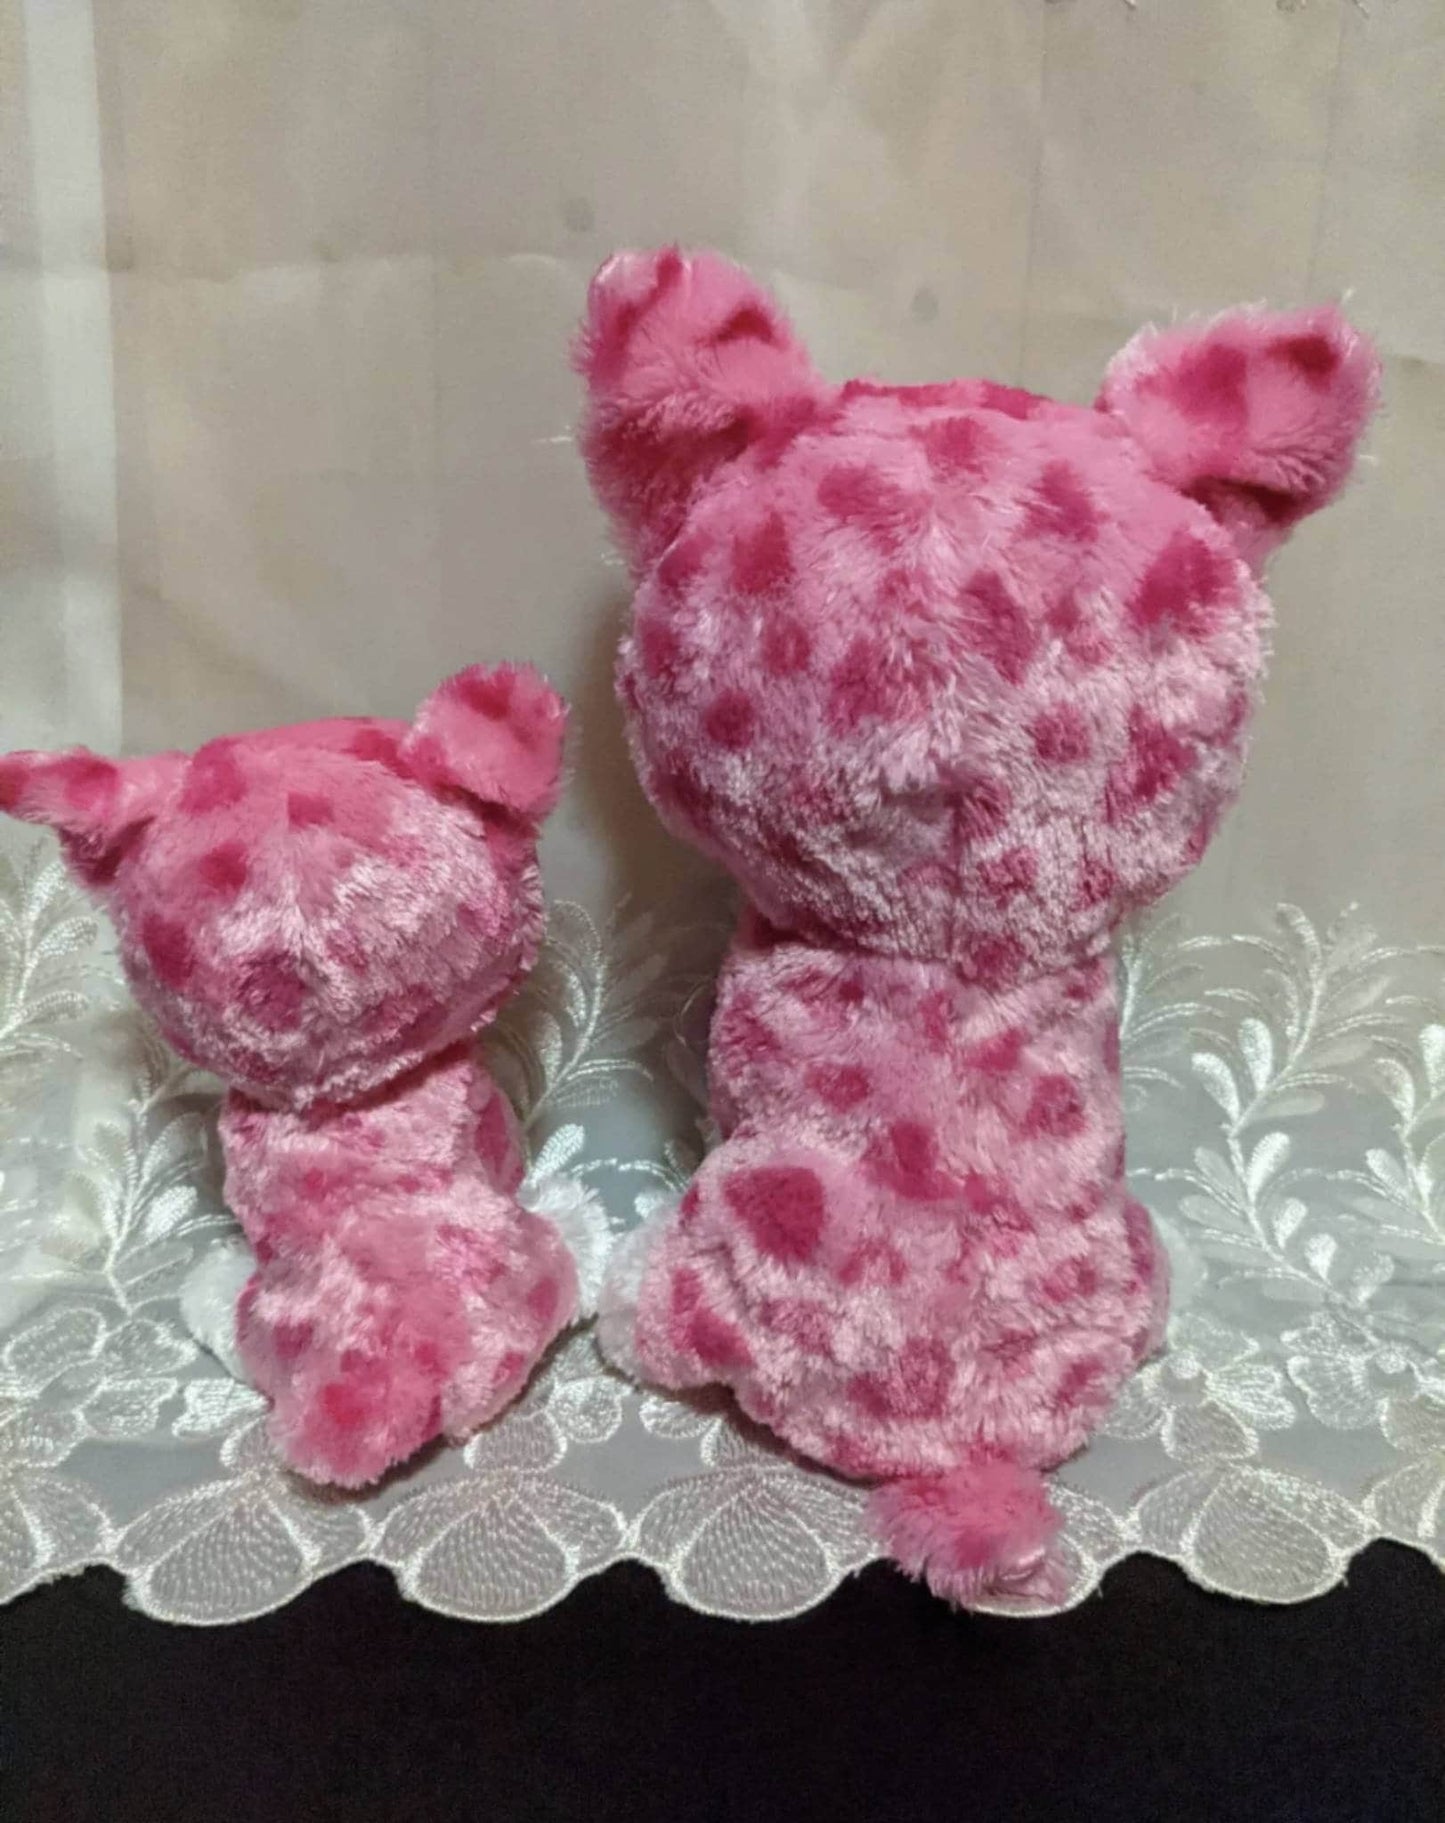 Ty Beanie Boo - Romeo The Pink Valentine's Day Dog With Heart (Sold As Set) - Vintage Beanies Canada